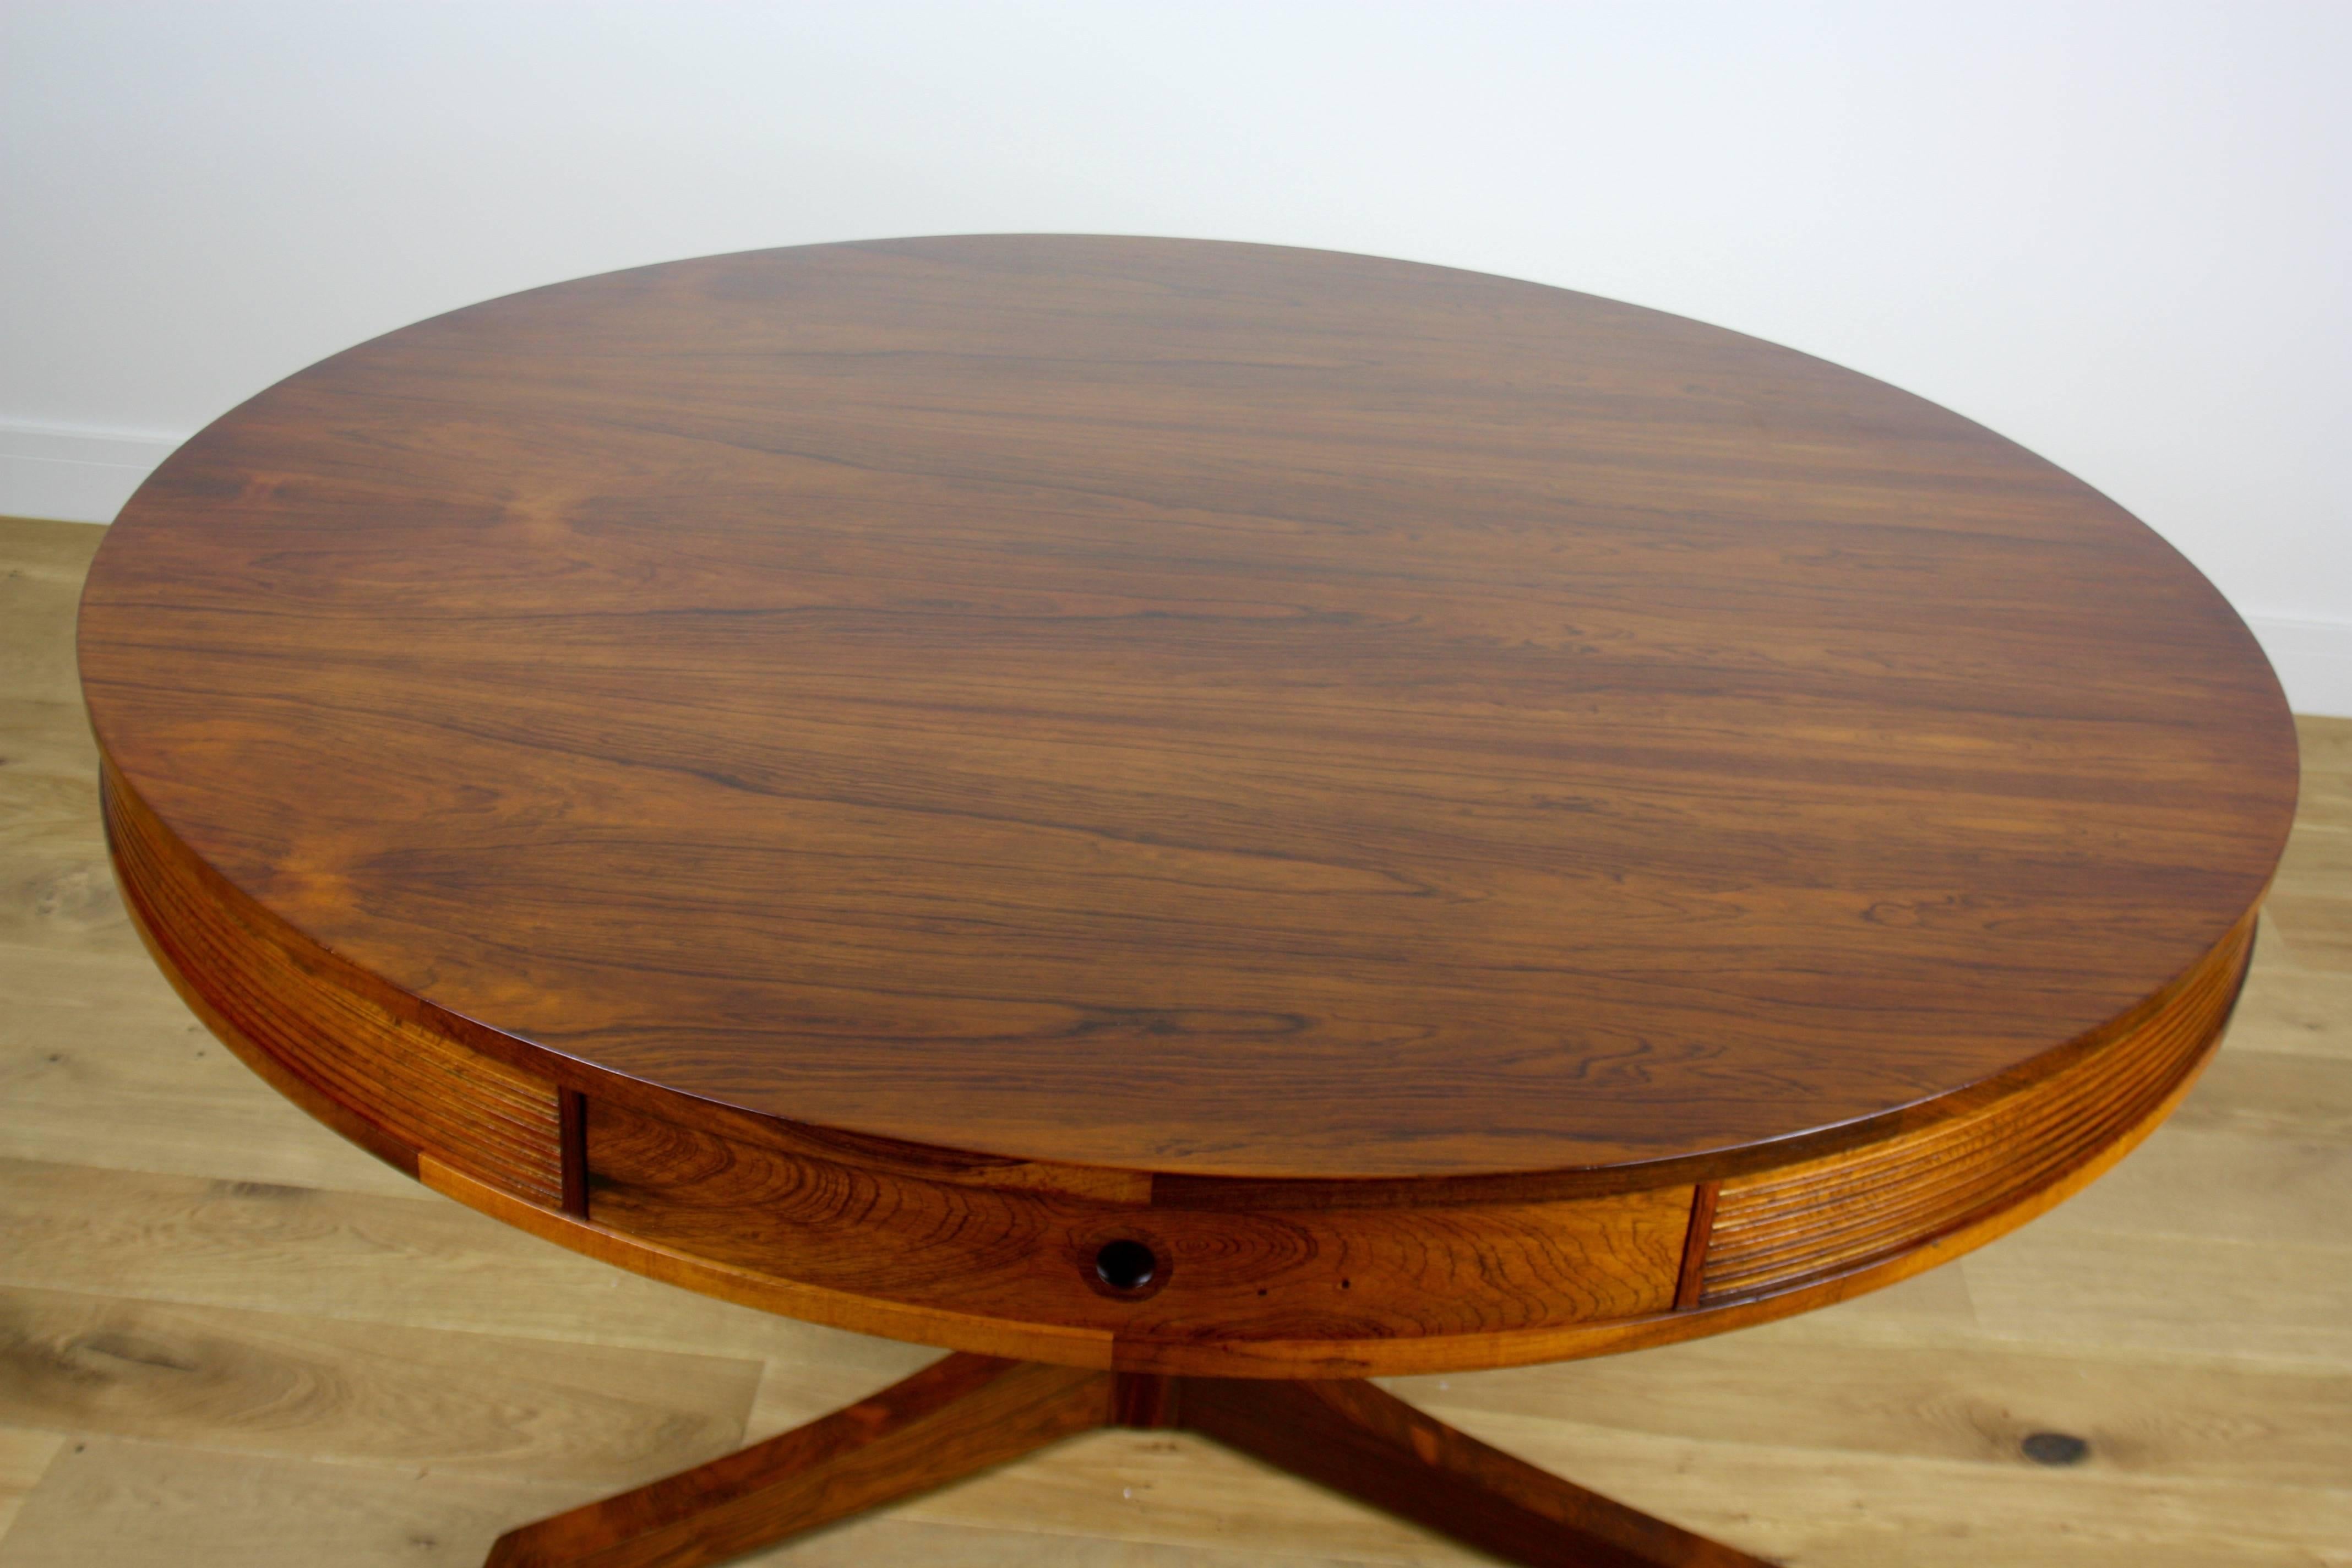 Mid-Century Modern design dining table.
Mid-20th century modern design rosewood drum table.
Beautiful rosewood drum table designed by Robert Heritage for Archie Shine.
Reeded frieze with four drawers.
There are two sizes for these table and this